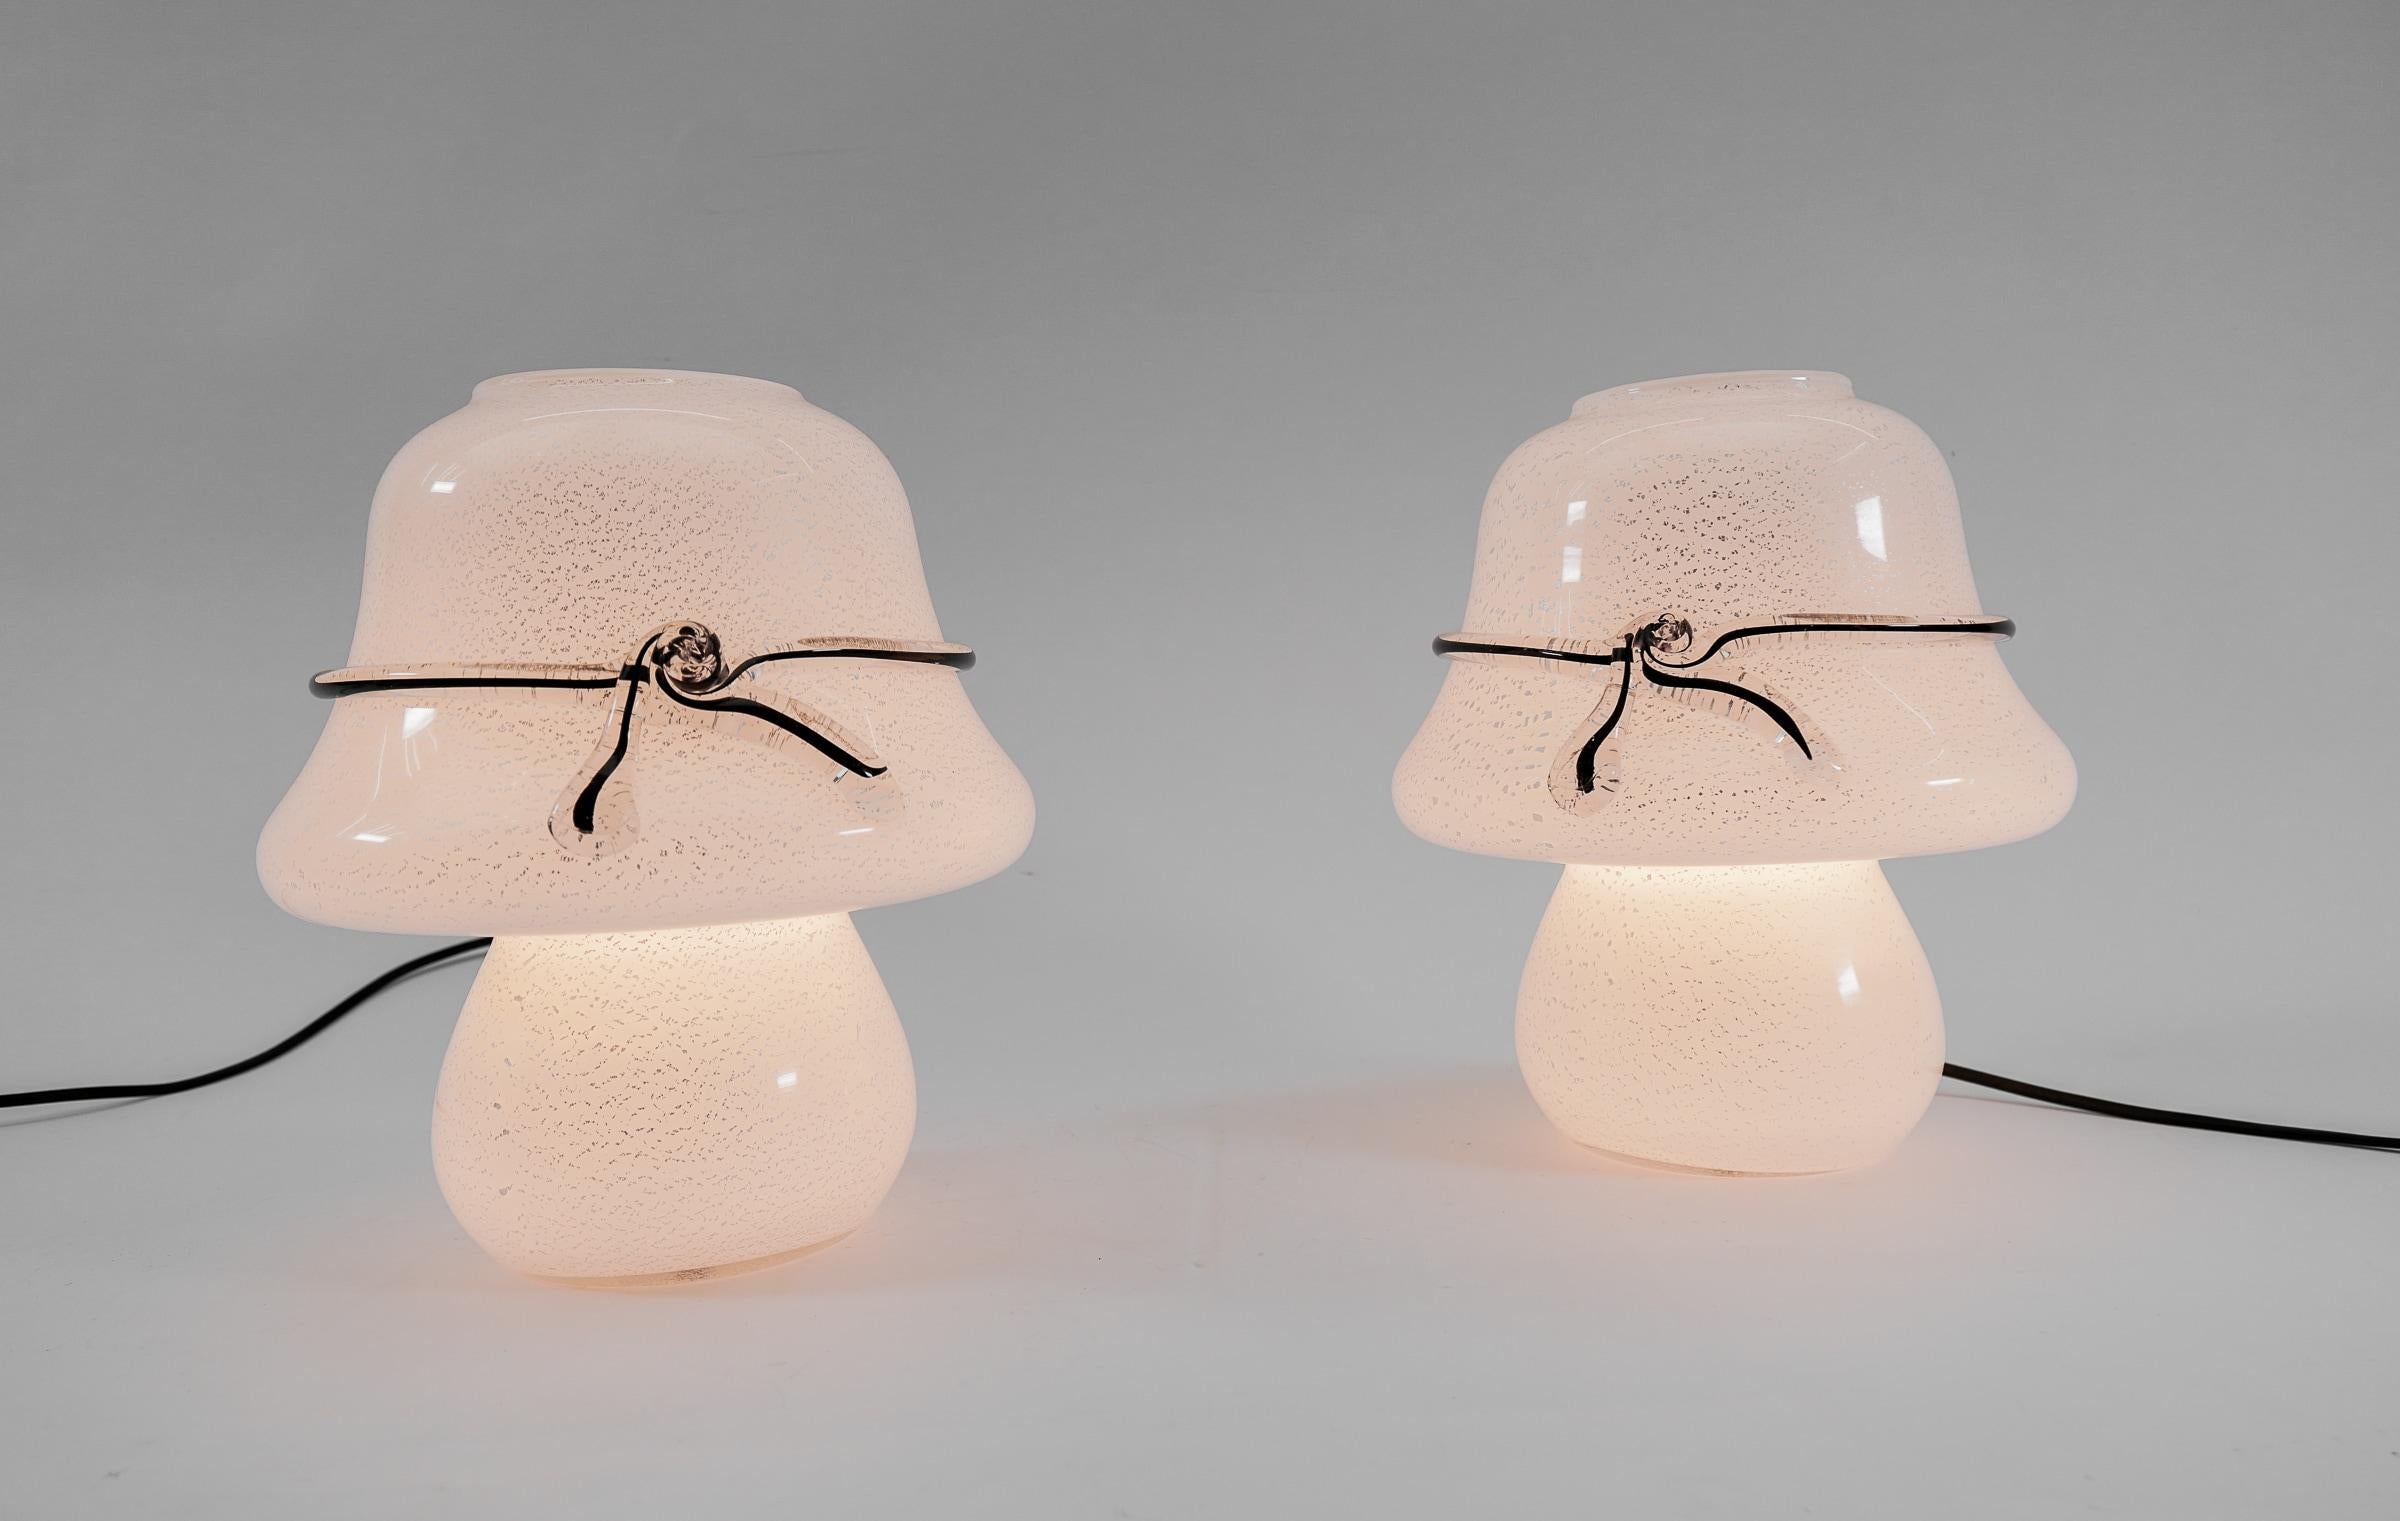 Murano Glass Pair of Murano Mushroom Table Lamps with Enclosed Silver Platelets, 1960s For Sale